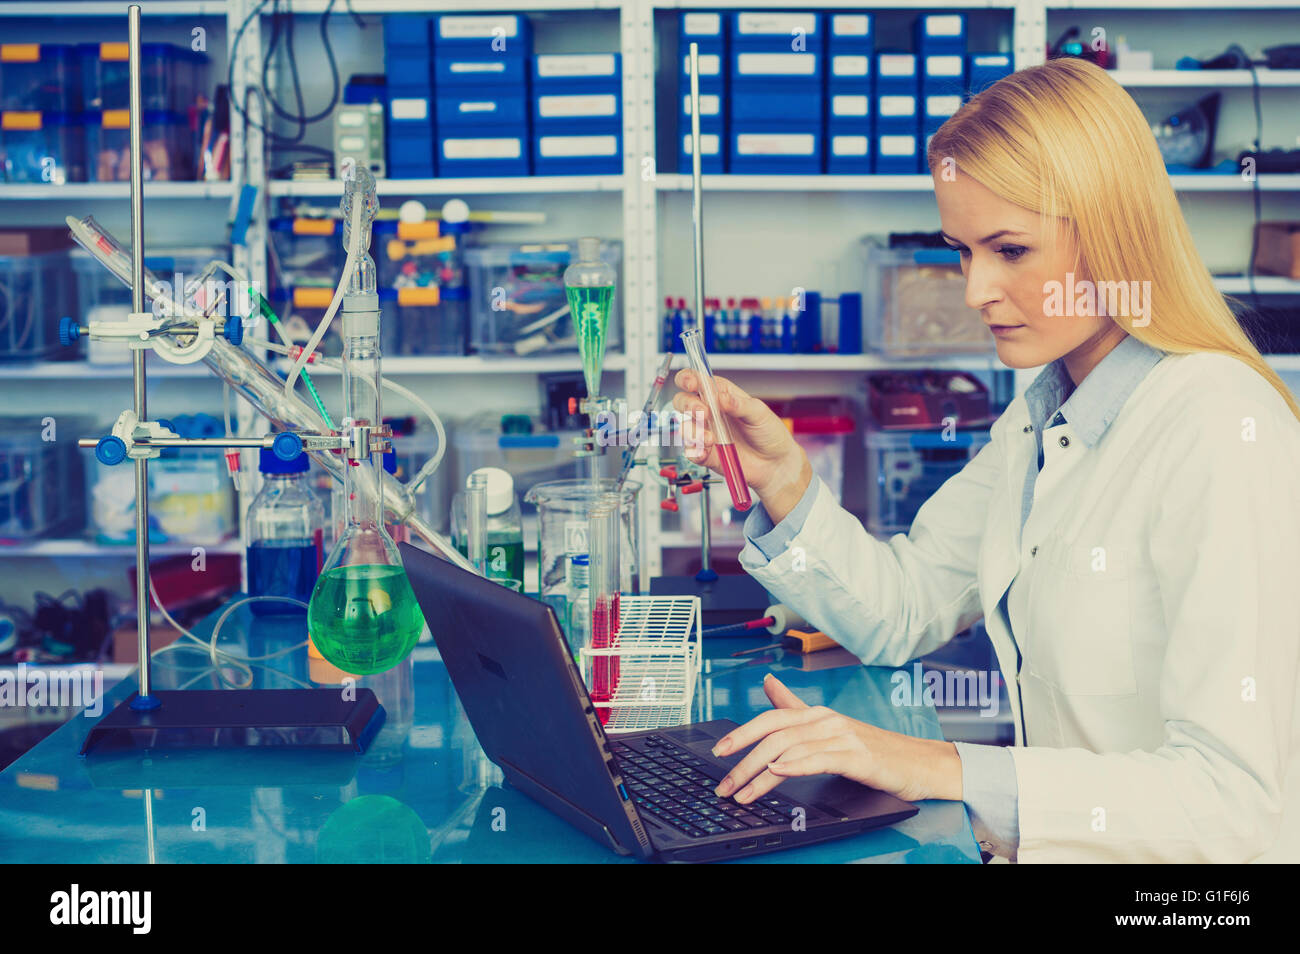 MODEL RELEASED. Female chemist working on a laptop in the laboratory. Stock Photo